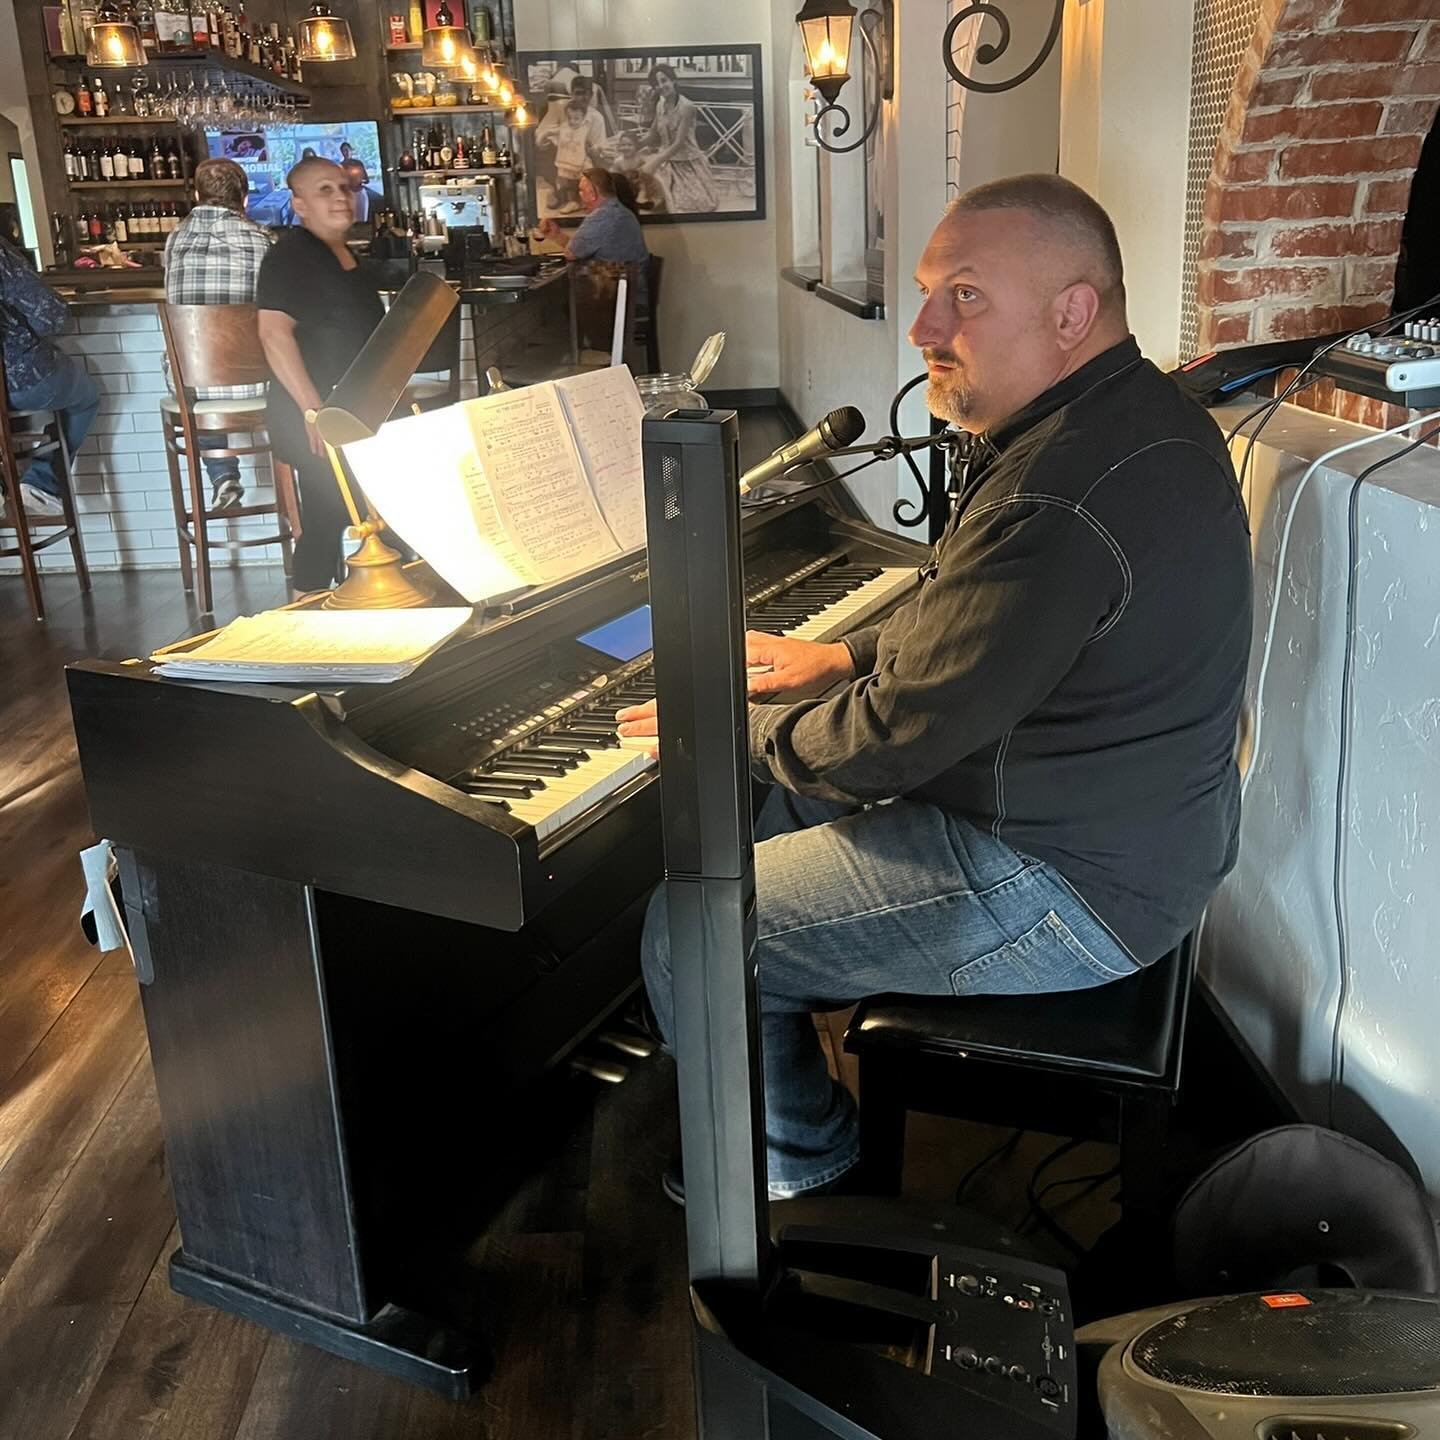 🎶 Join us for dinner at Savianos Italian Kitchen and experience the fantastic live music by one-man band Mark Dunn! 🍽️ Mark is here every Wednesday through Saturday, playing all the classics and taking requests, adding an extra layer of enjoyment t